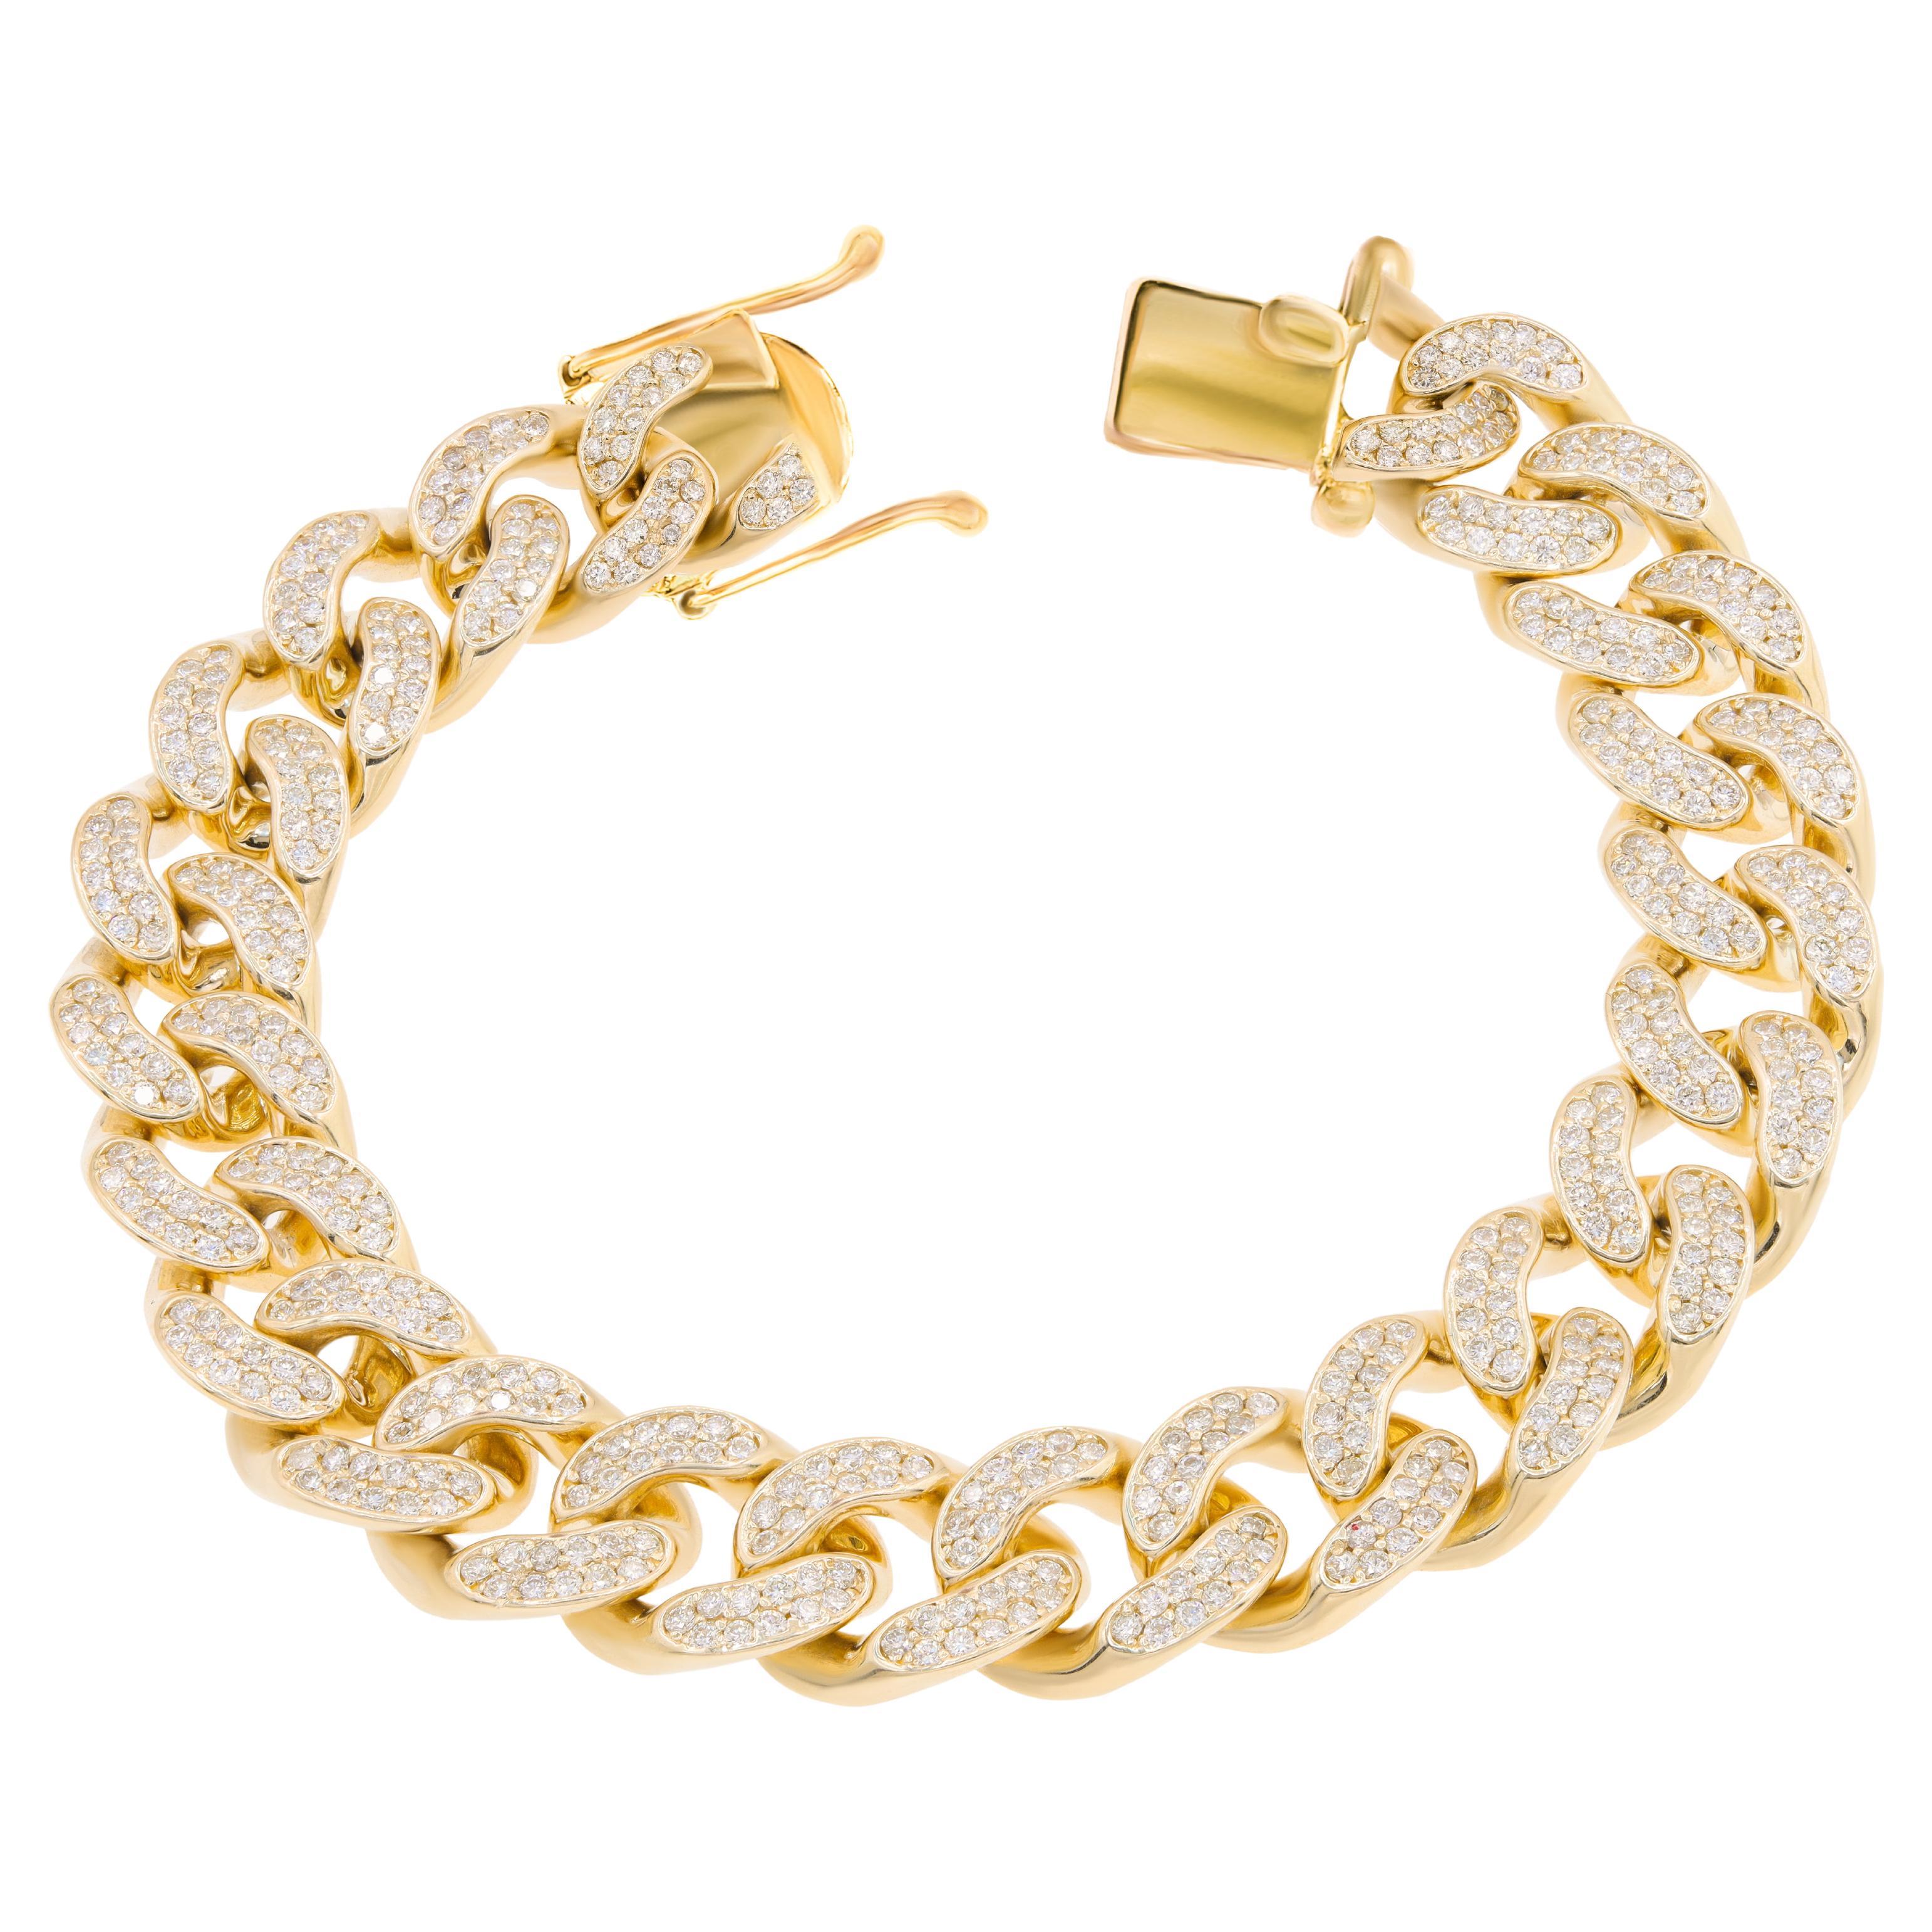 DIANA M. 14kt yellow gold pave linked bracelet featuring 6.00 cts of diamond For Sale